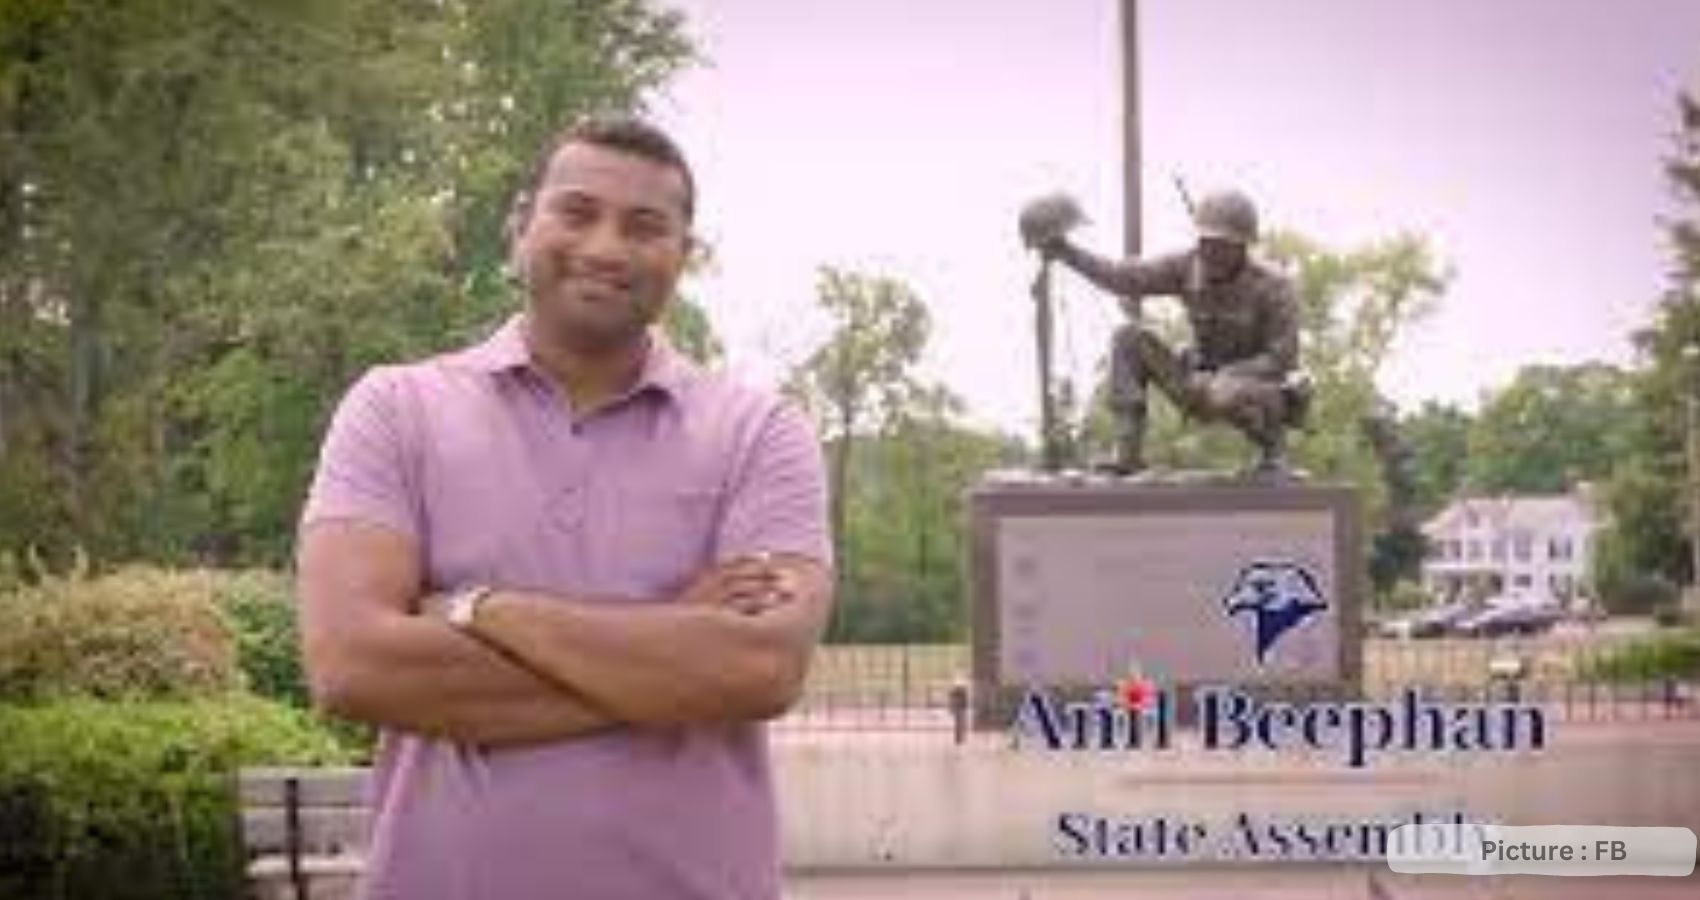 Anil Beephan, First Ever Indian-American Republican To NY State Assembly